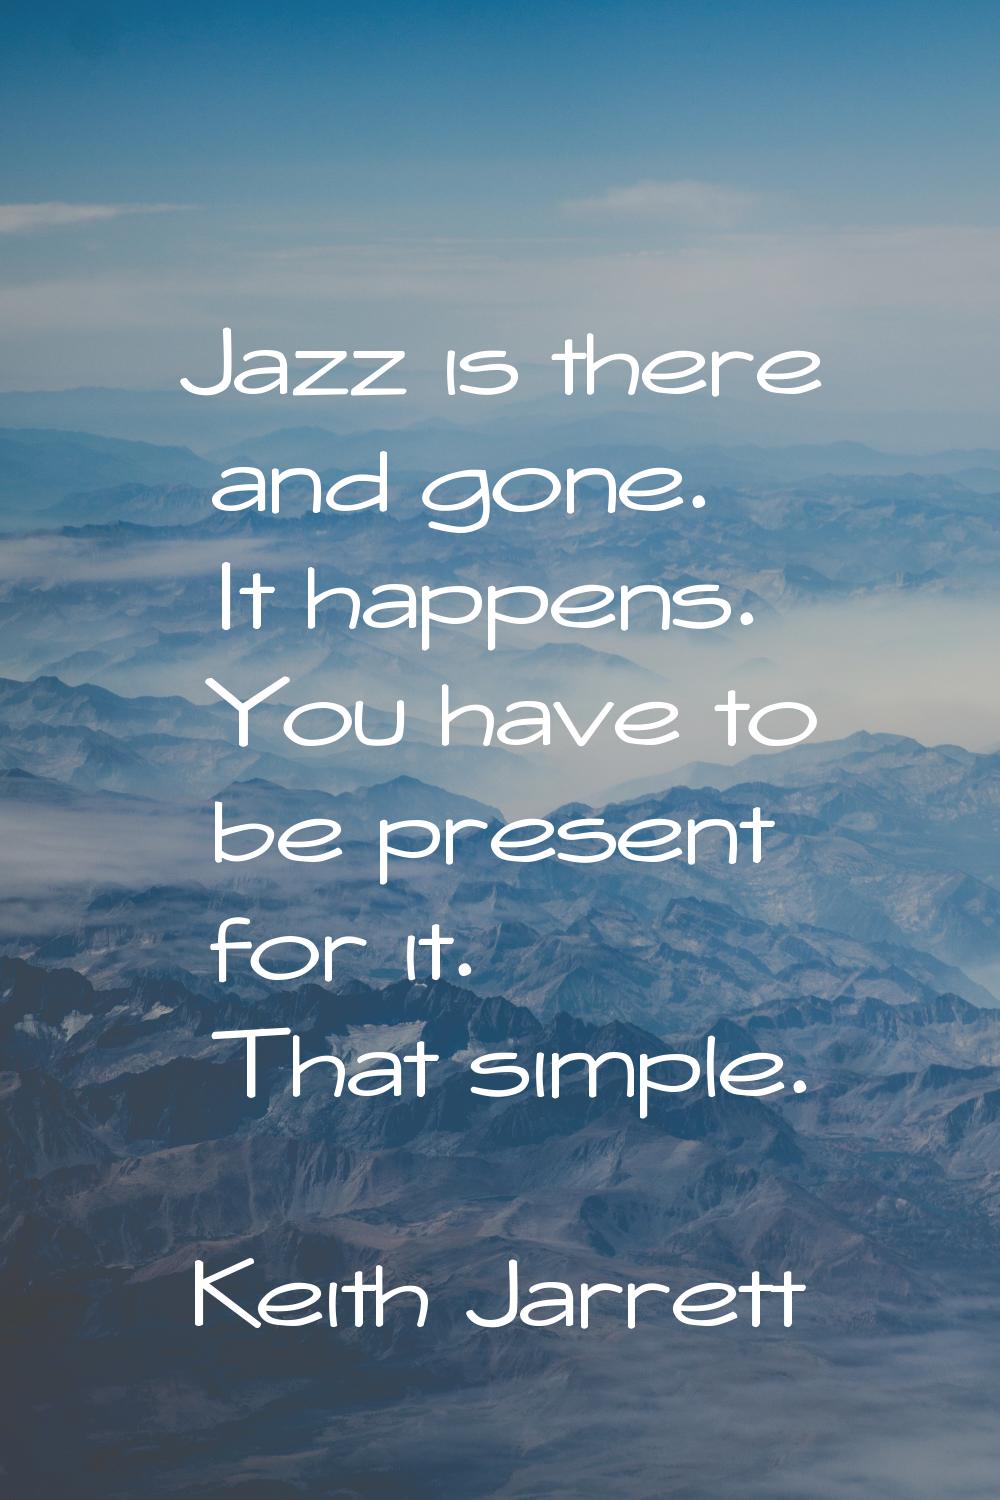 Jazz is there and gone. It happens. You have to be present for it. That simple.